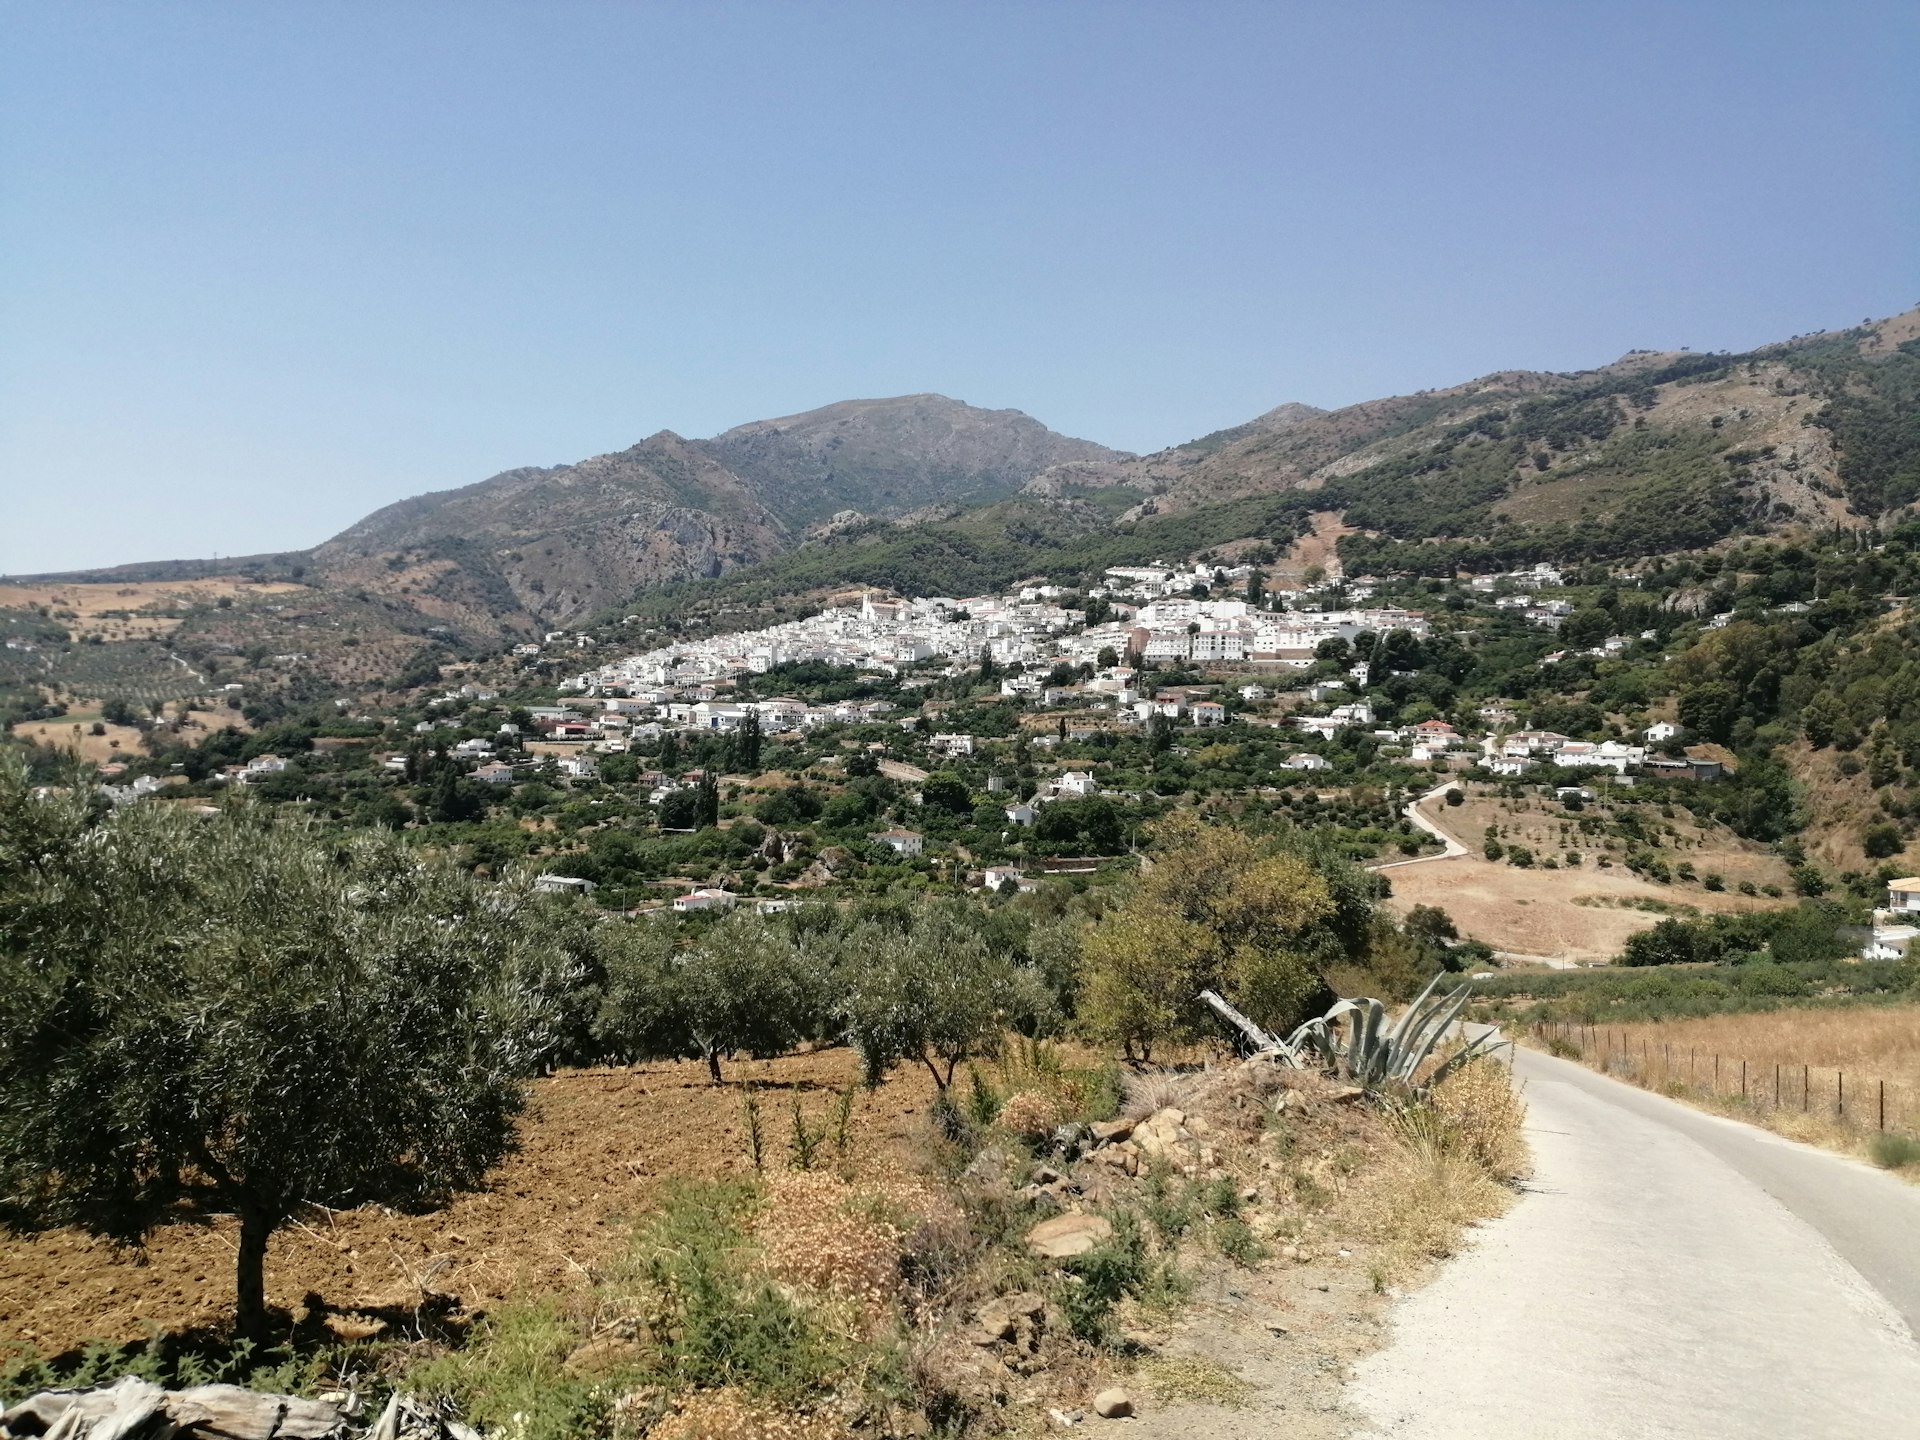 Casarabonela: a town of white building nestled in a valley among green hillsides